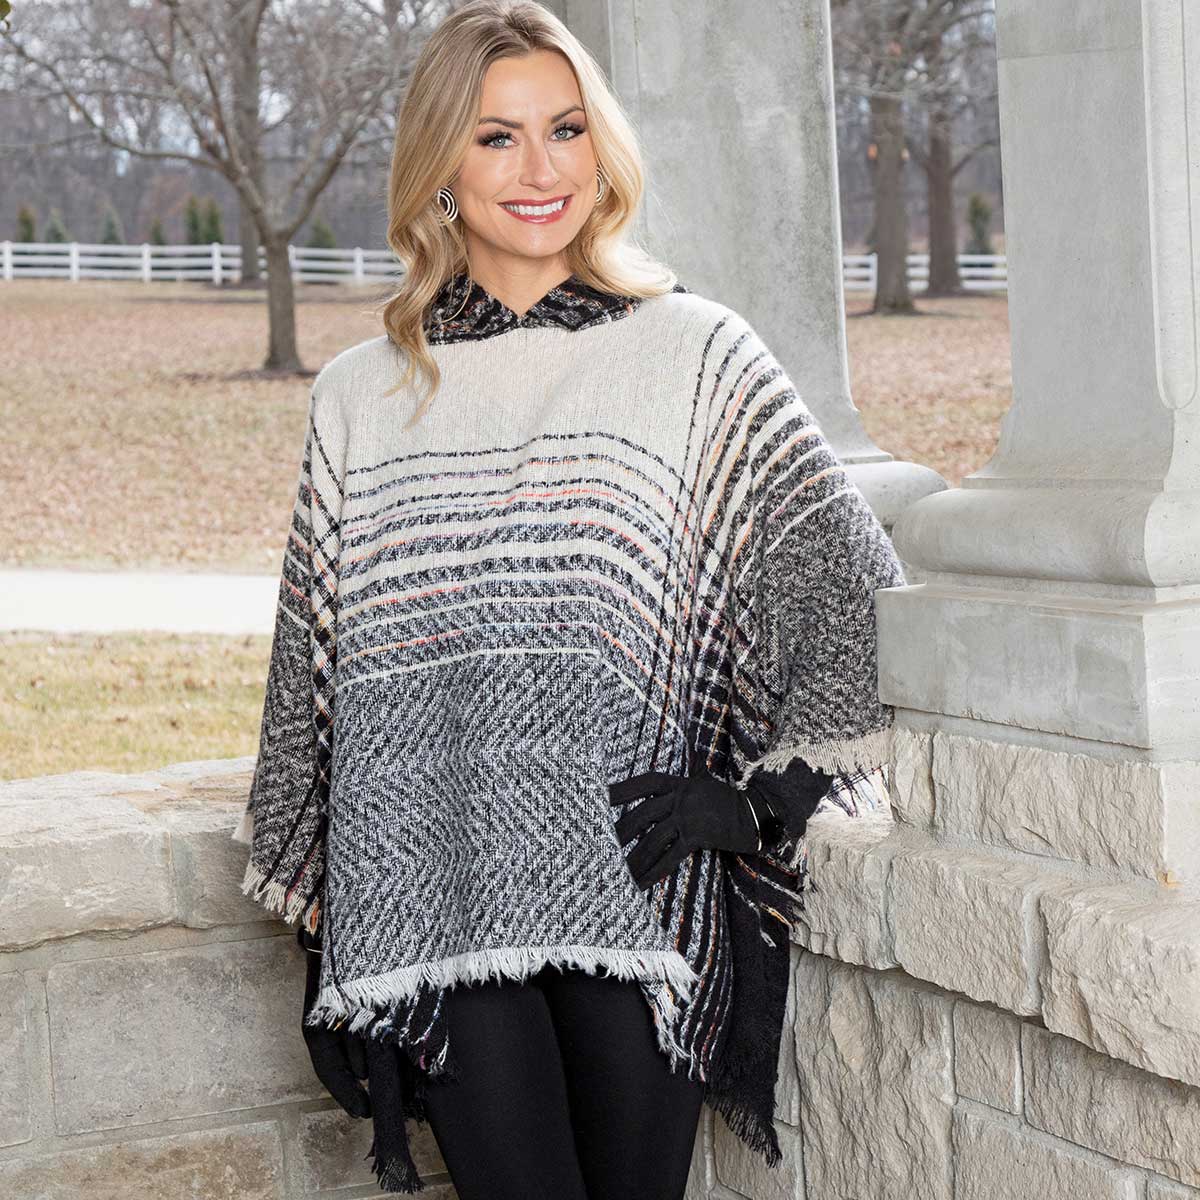 Black and Cream Knit Poncho with Hood 53"x27"